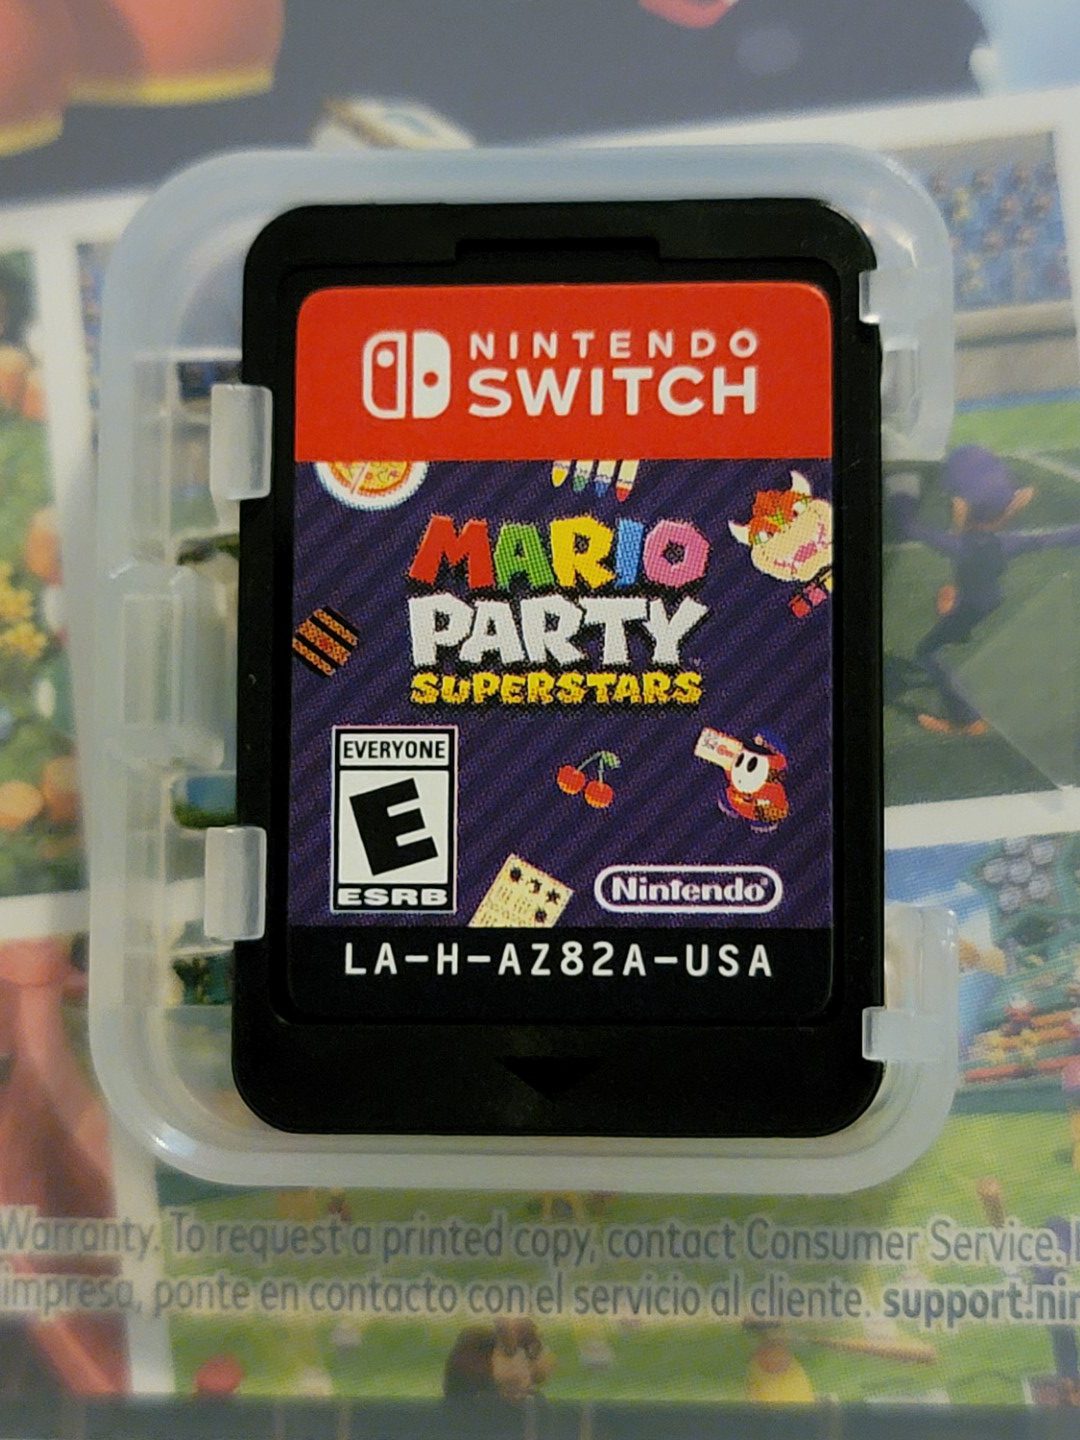 Mario Party Superstars Nintendo Switch - Game Cart inside the box